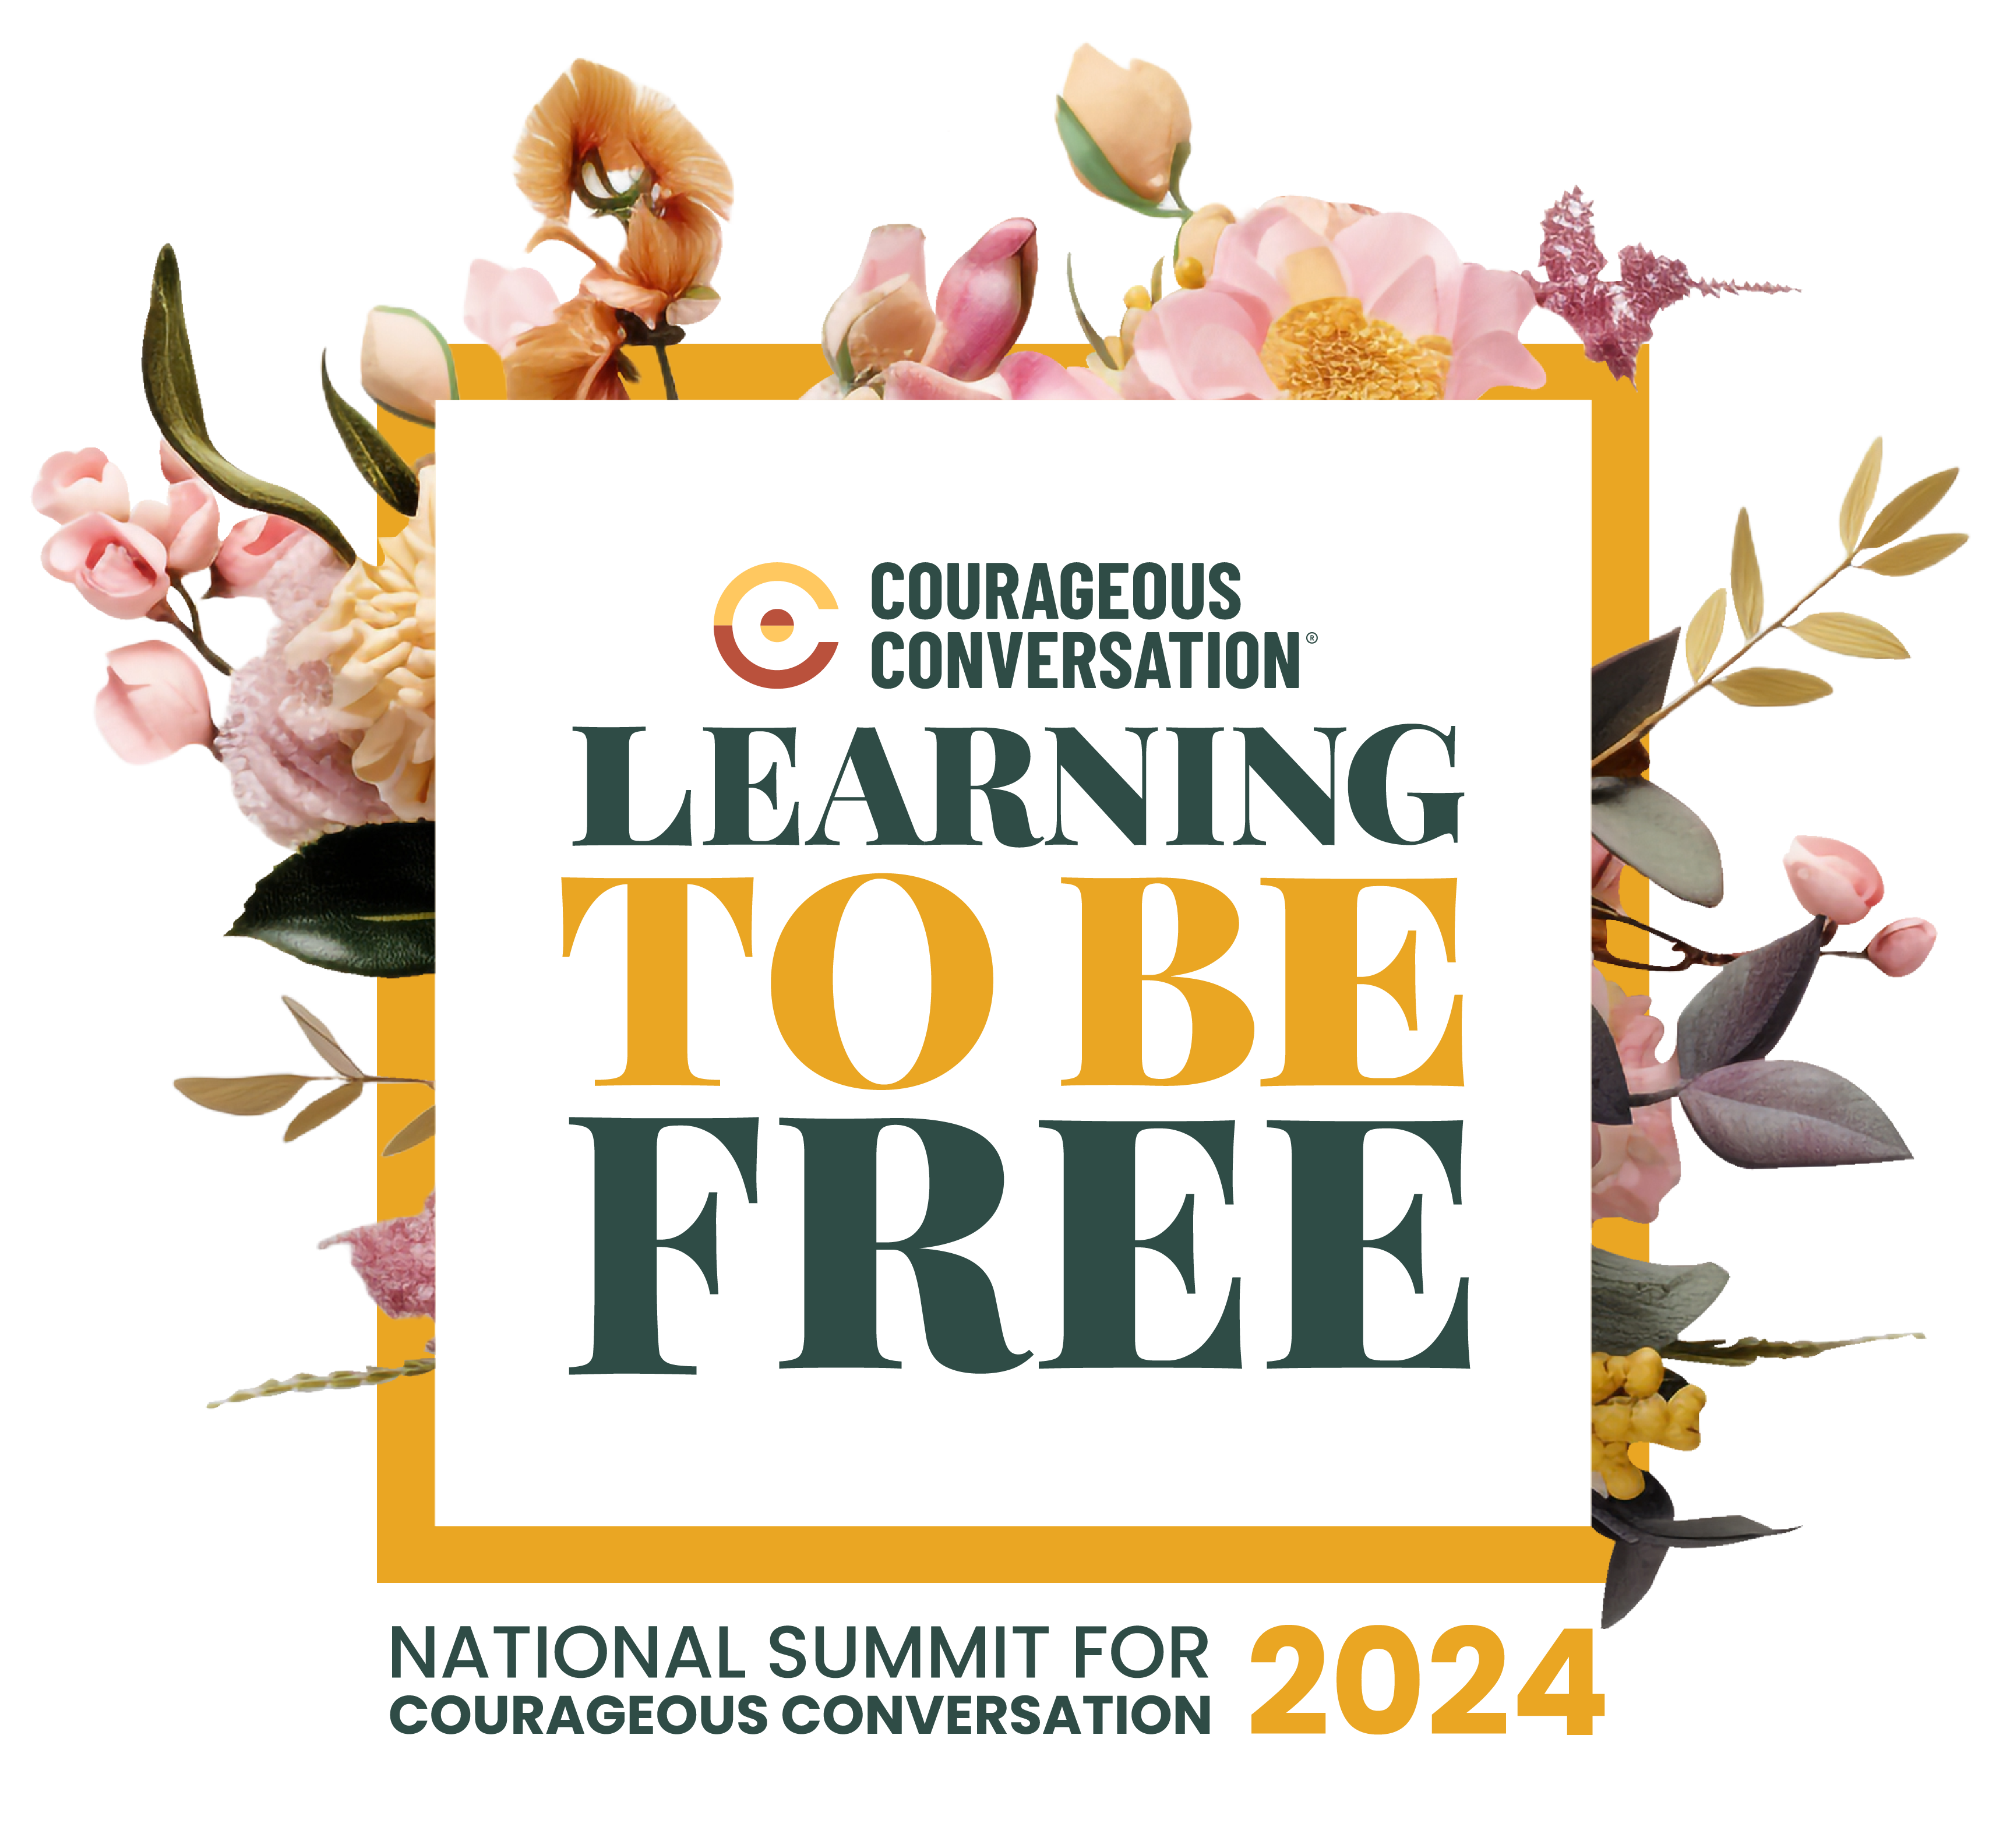 14th Annual National Summit for Courageous Conversation®